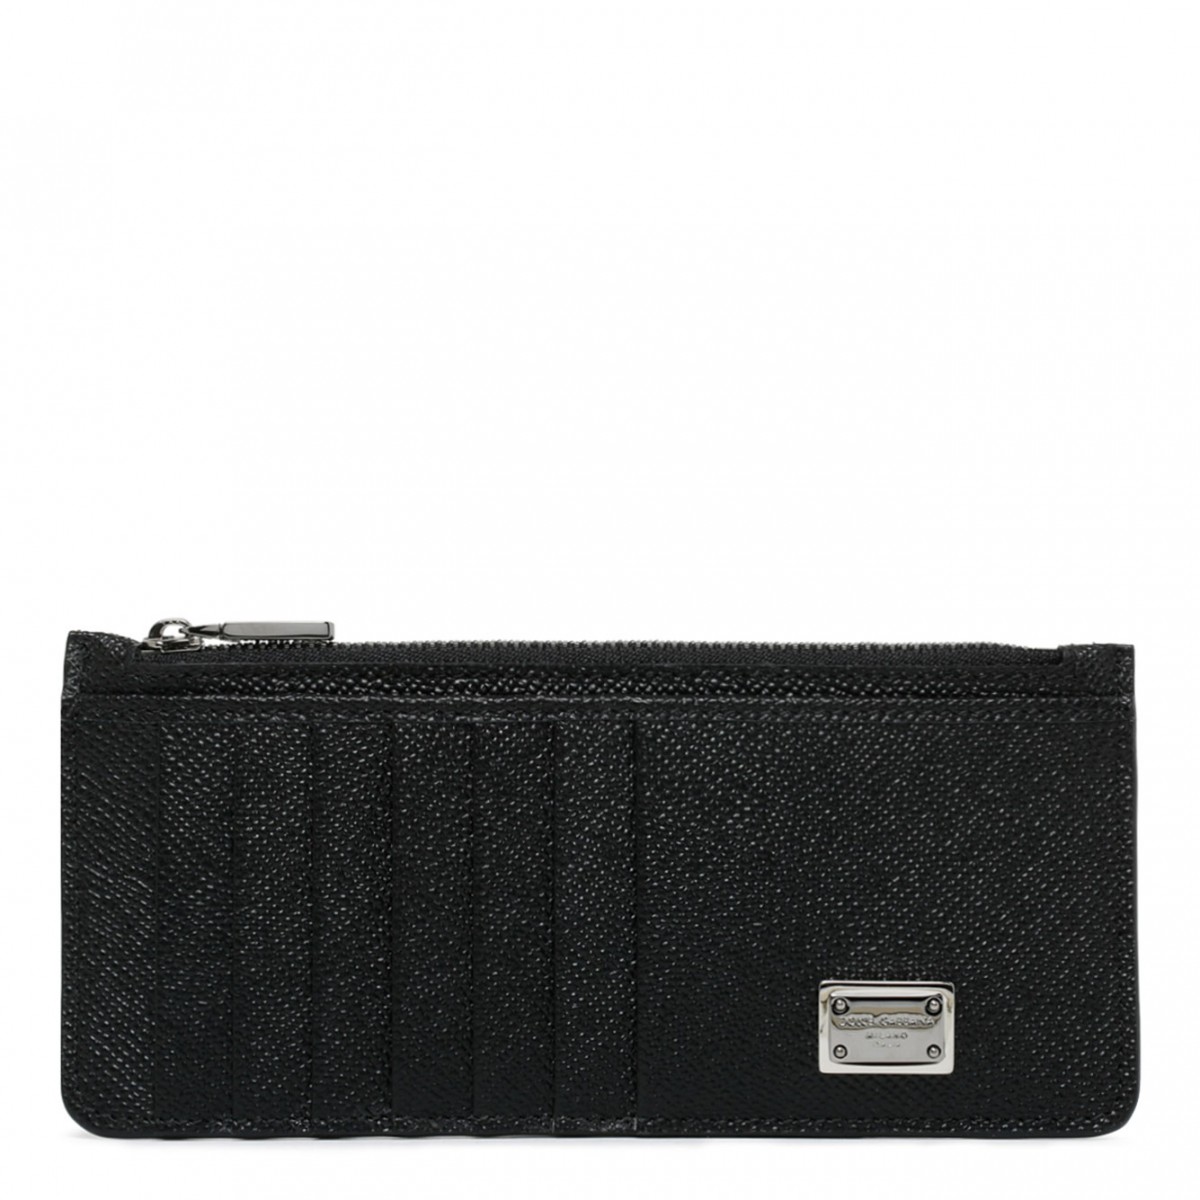 Black Calf Leather Wallet